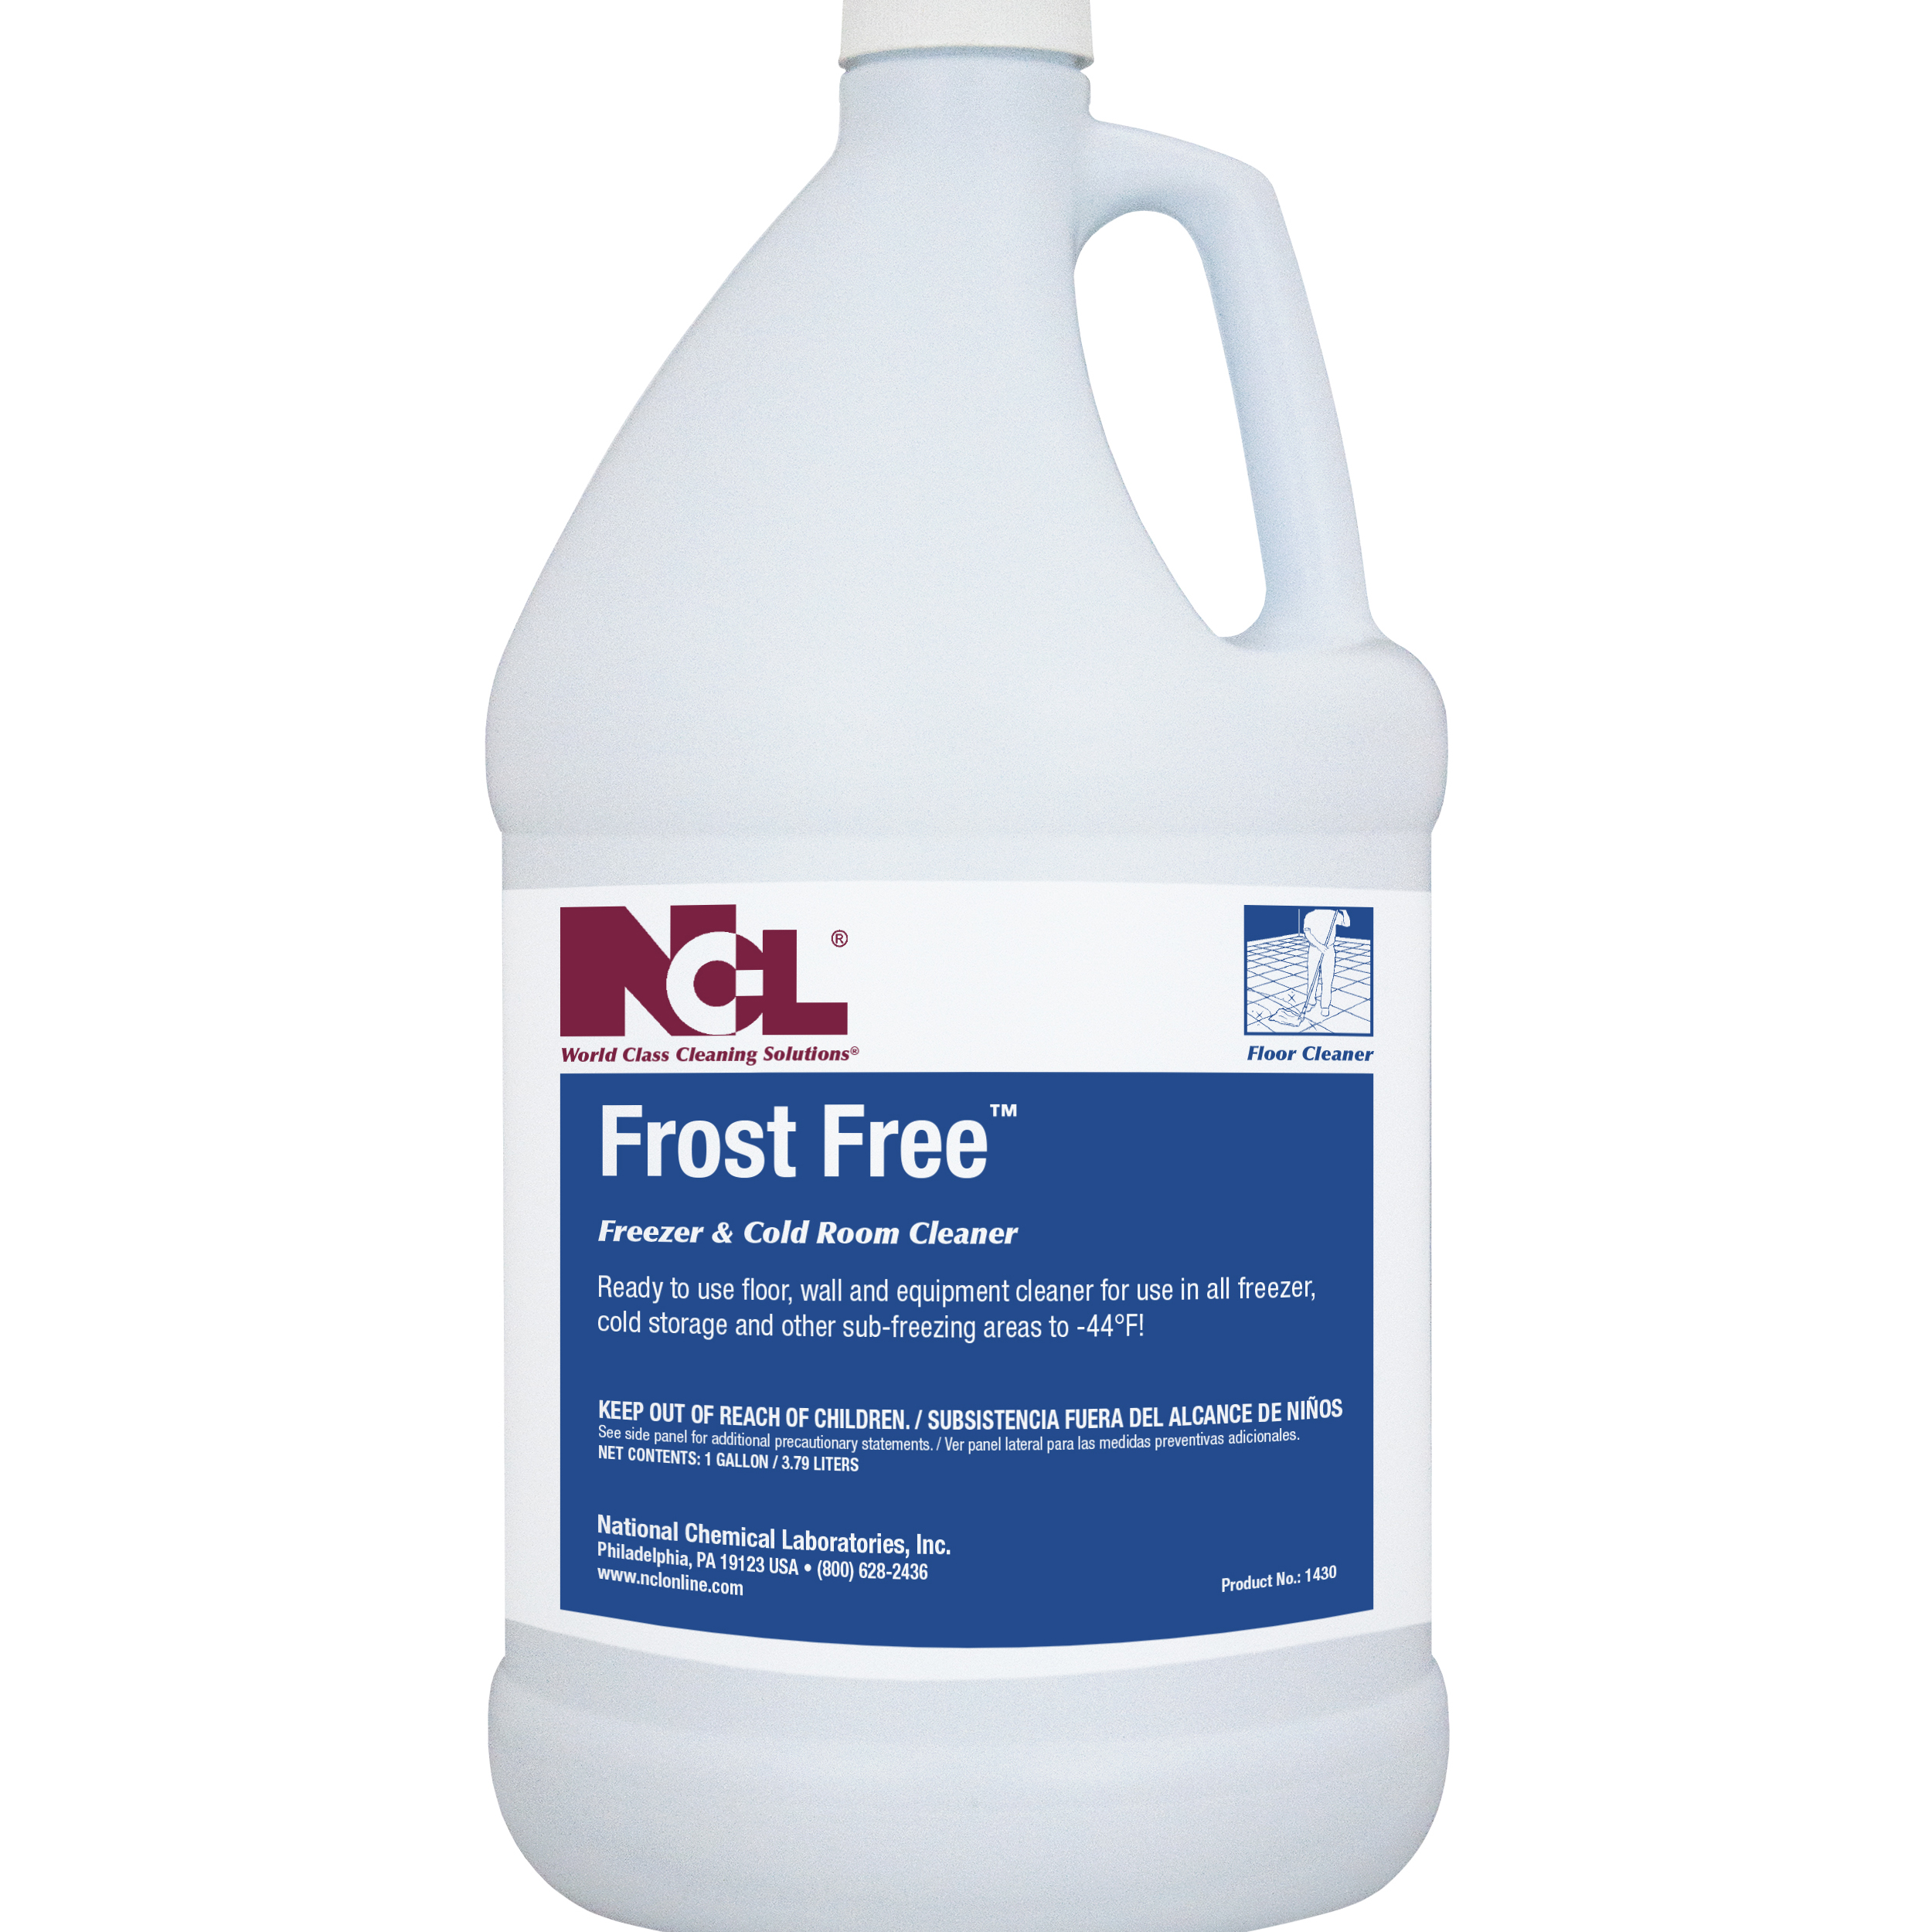  FROST FREE Freezer and Cold Room Cleaner 4/1 Gal. Case (NCL1430-29) 